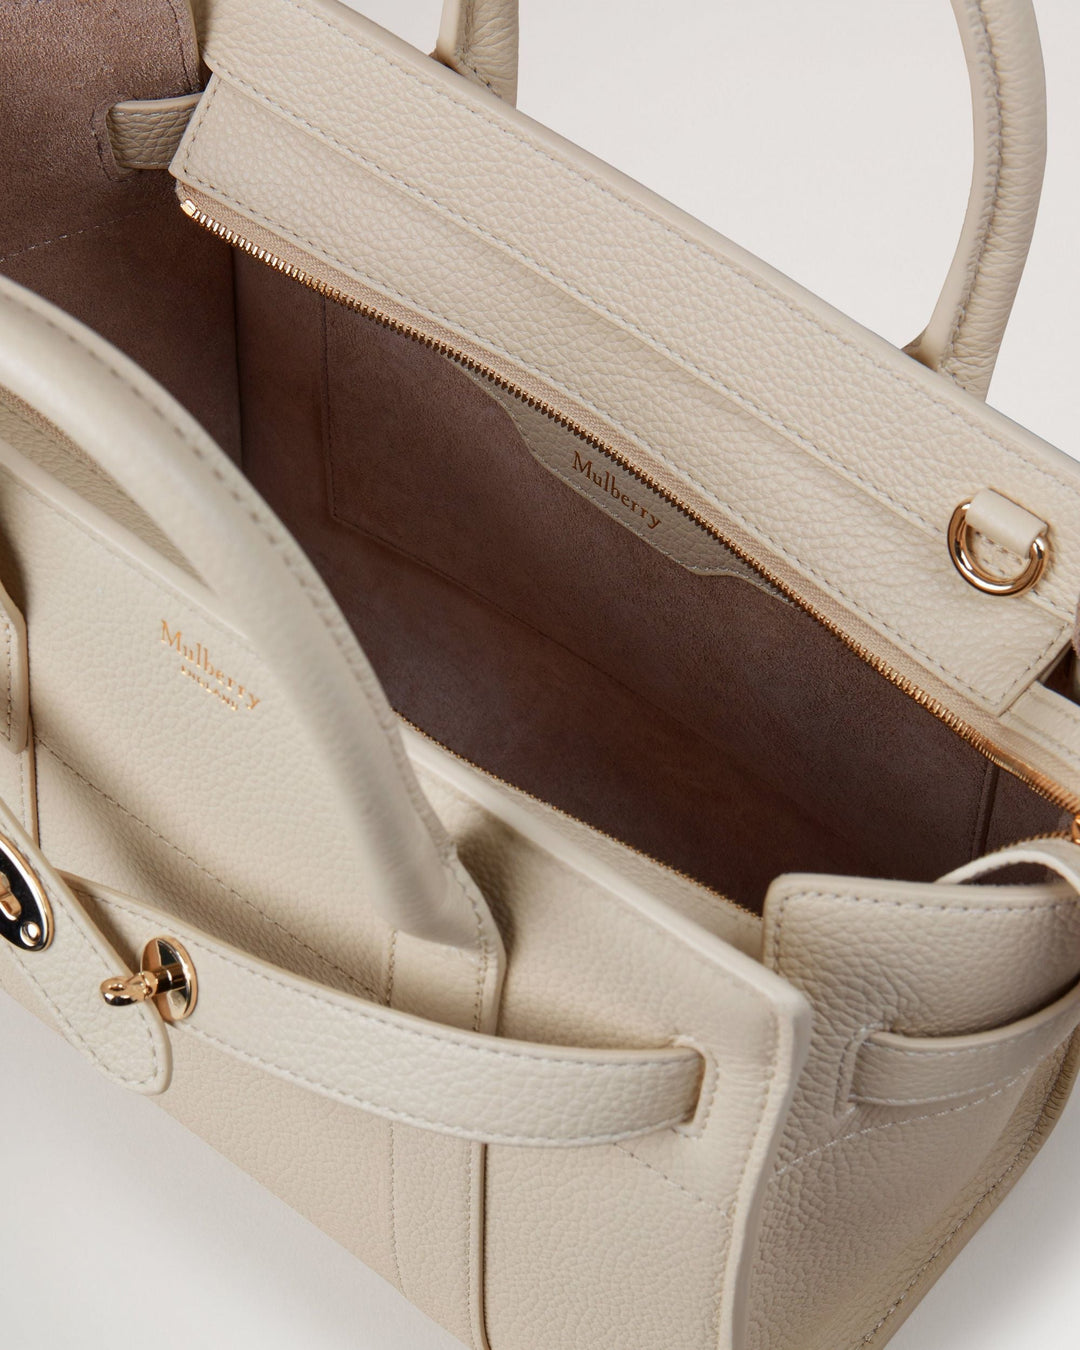 Mulberry-Mini-Zipped-Bayswater-Shoulder-Bag-Small-Classic-Grain-Off-White-4